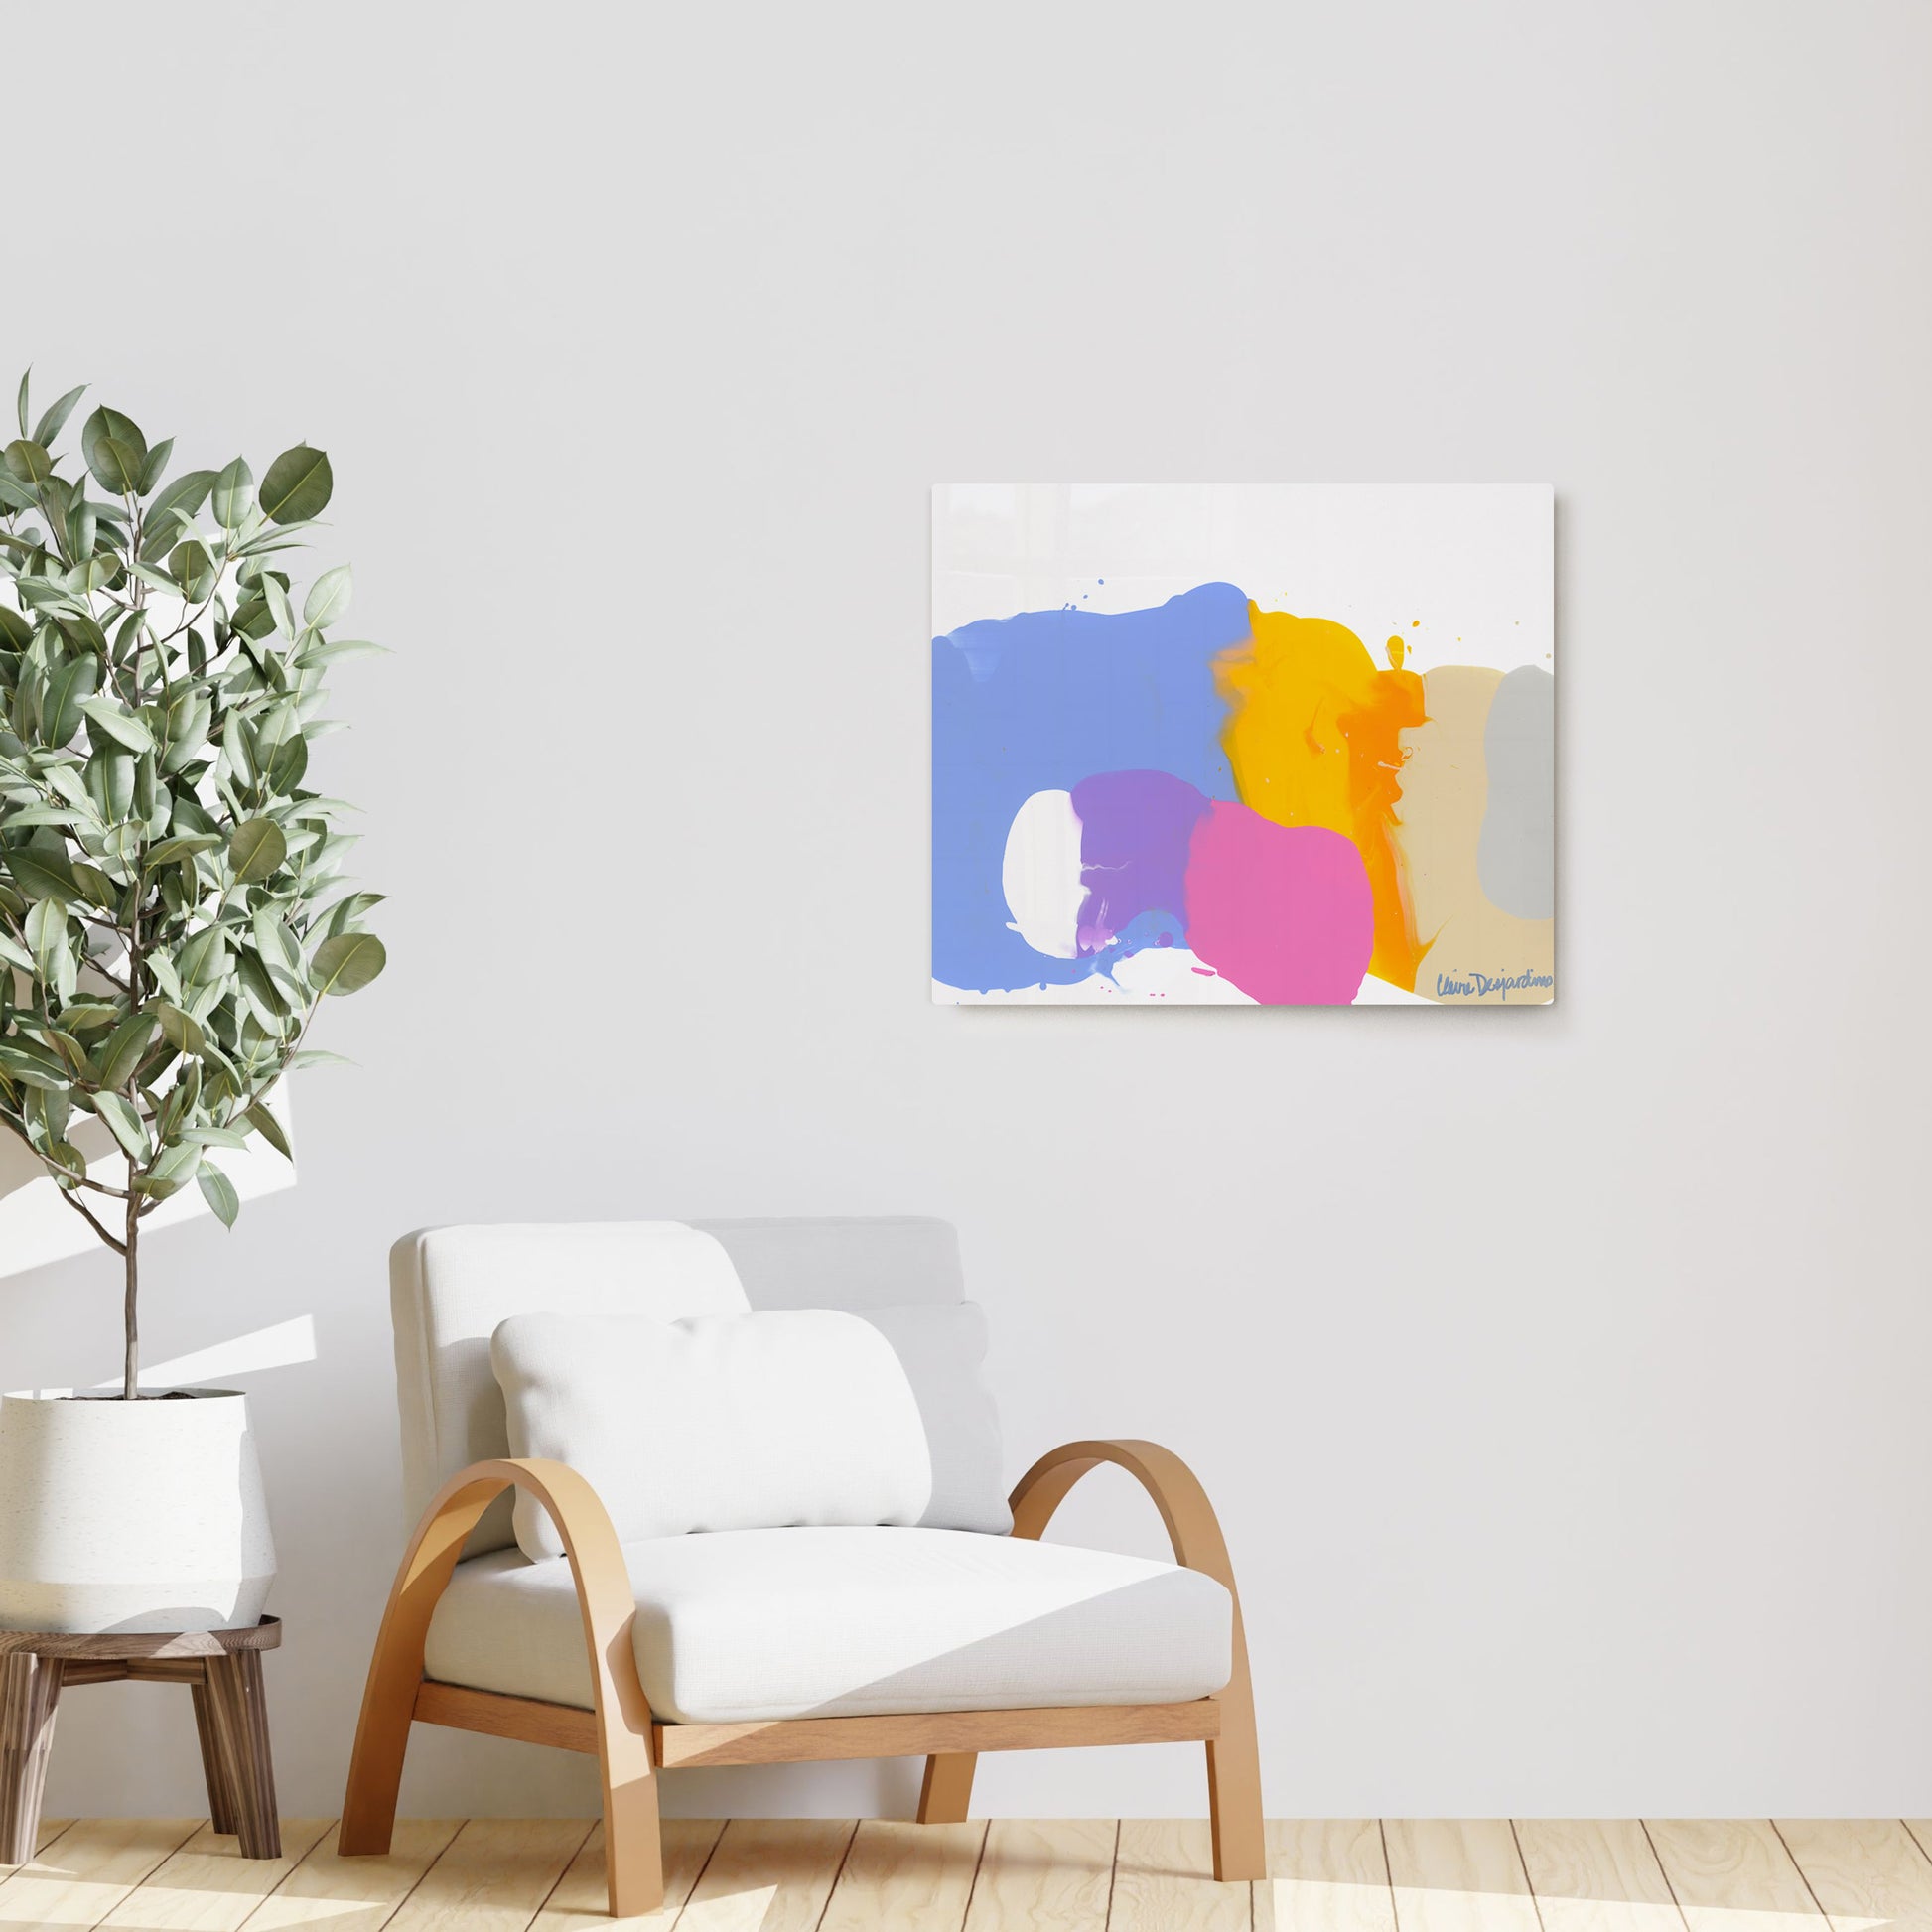 Claire Desjardins' Love 12 painting reproduced on HD metal print and displayed on wall